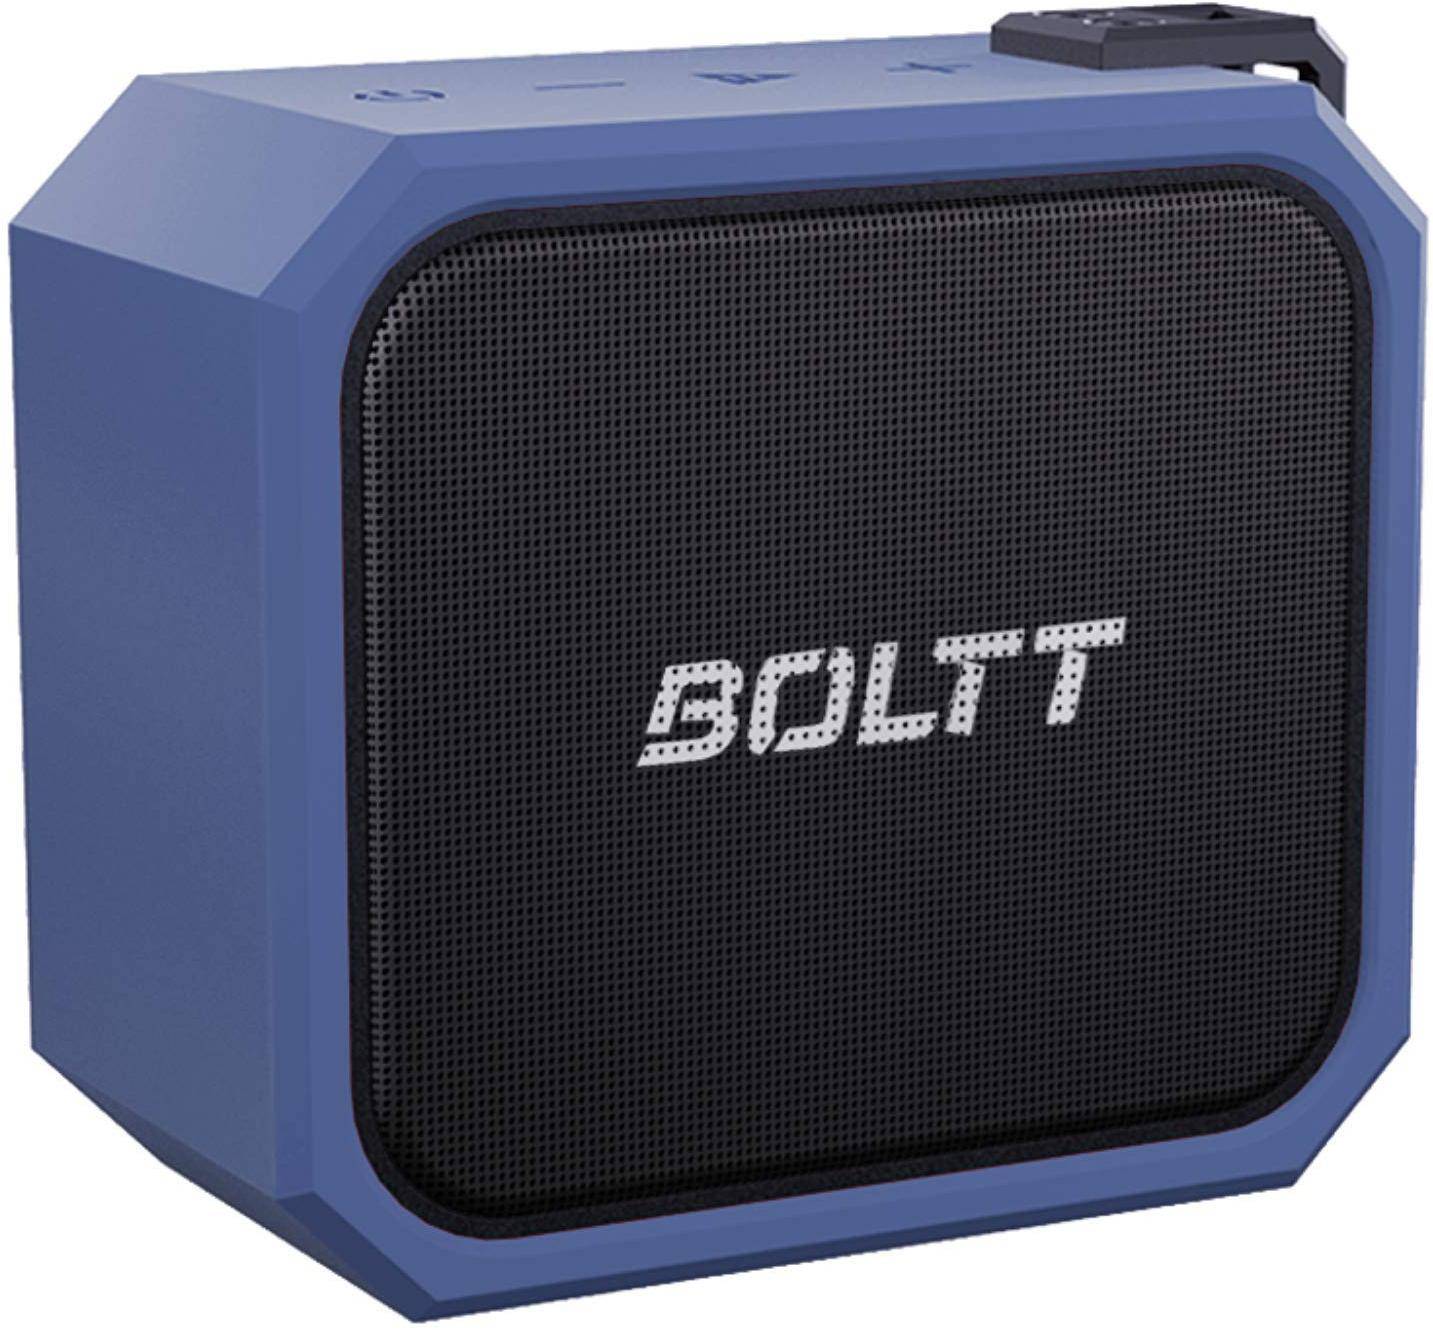 Fire Boltt Xplode 1100 Bluetooth Speakers zoom image